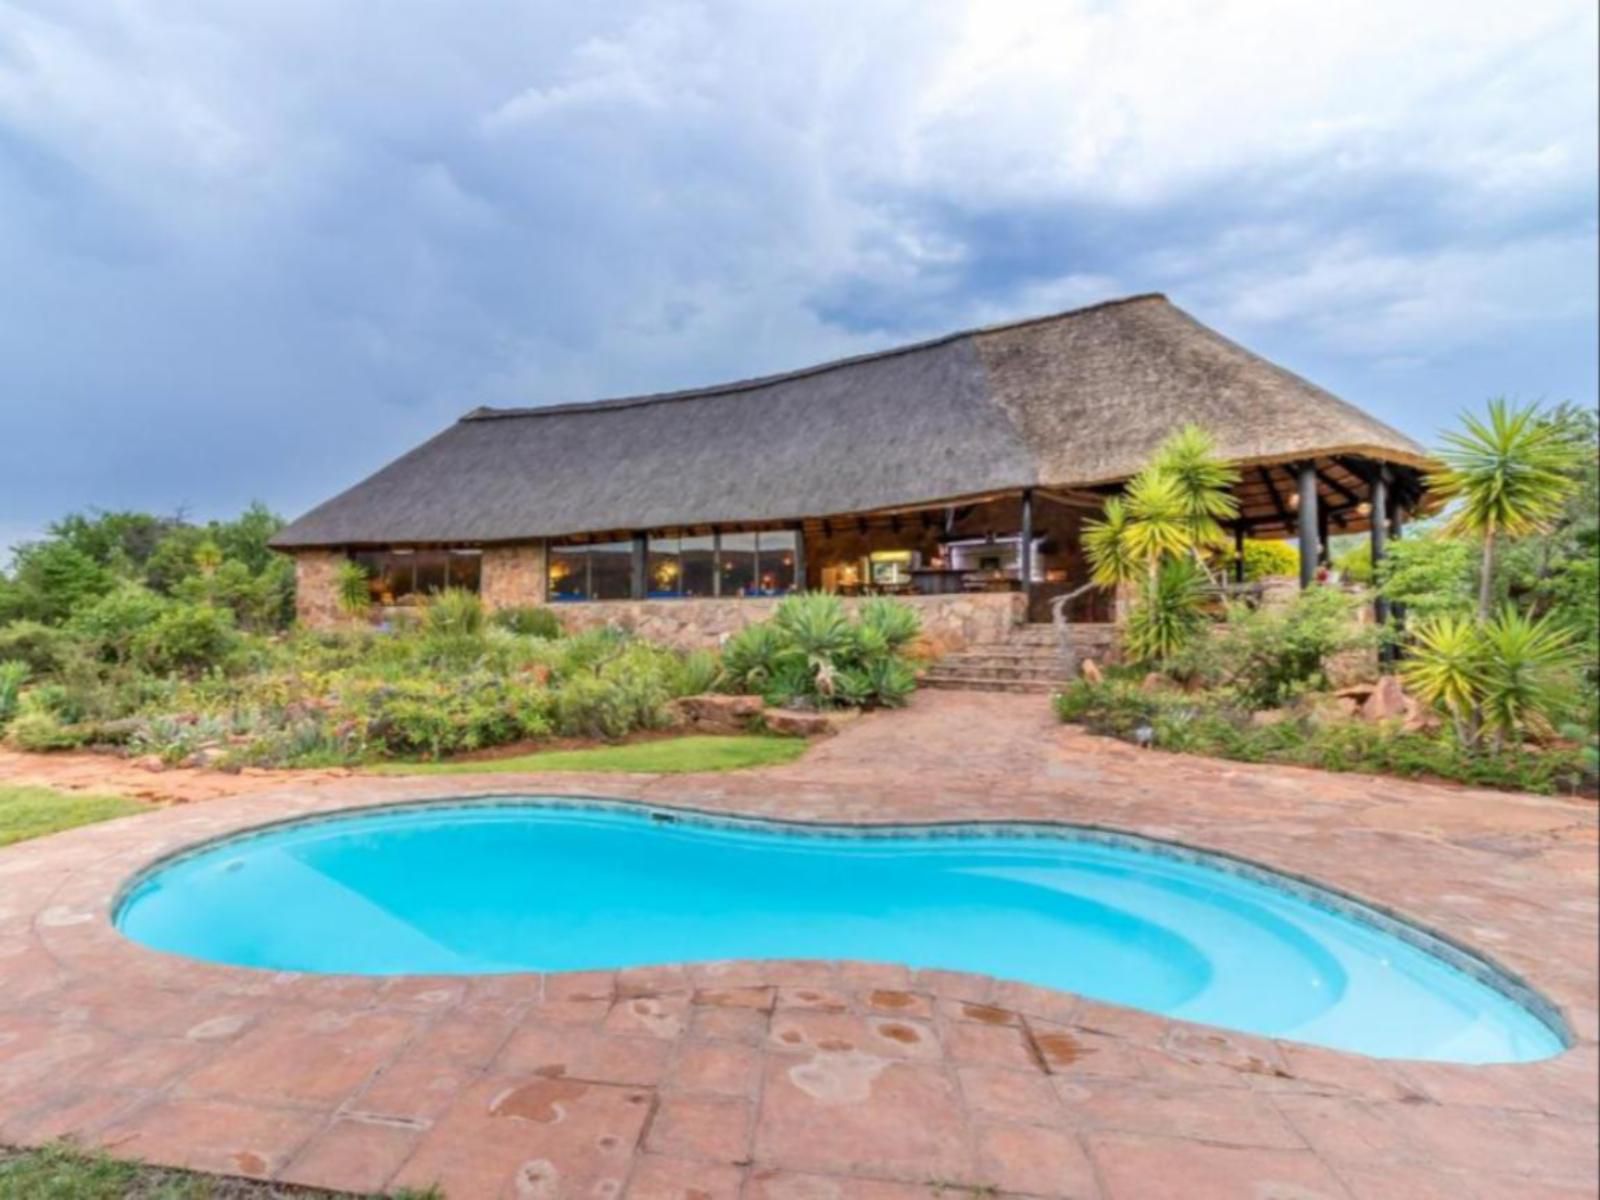 Iketla Lodge Ohrigstad Limpopo Province South Africa Complementary Colors, Swimming Pool